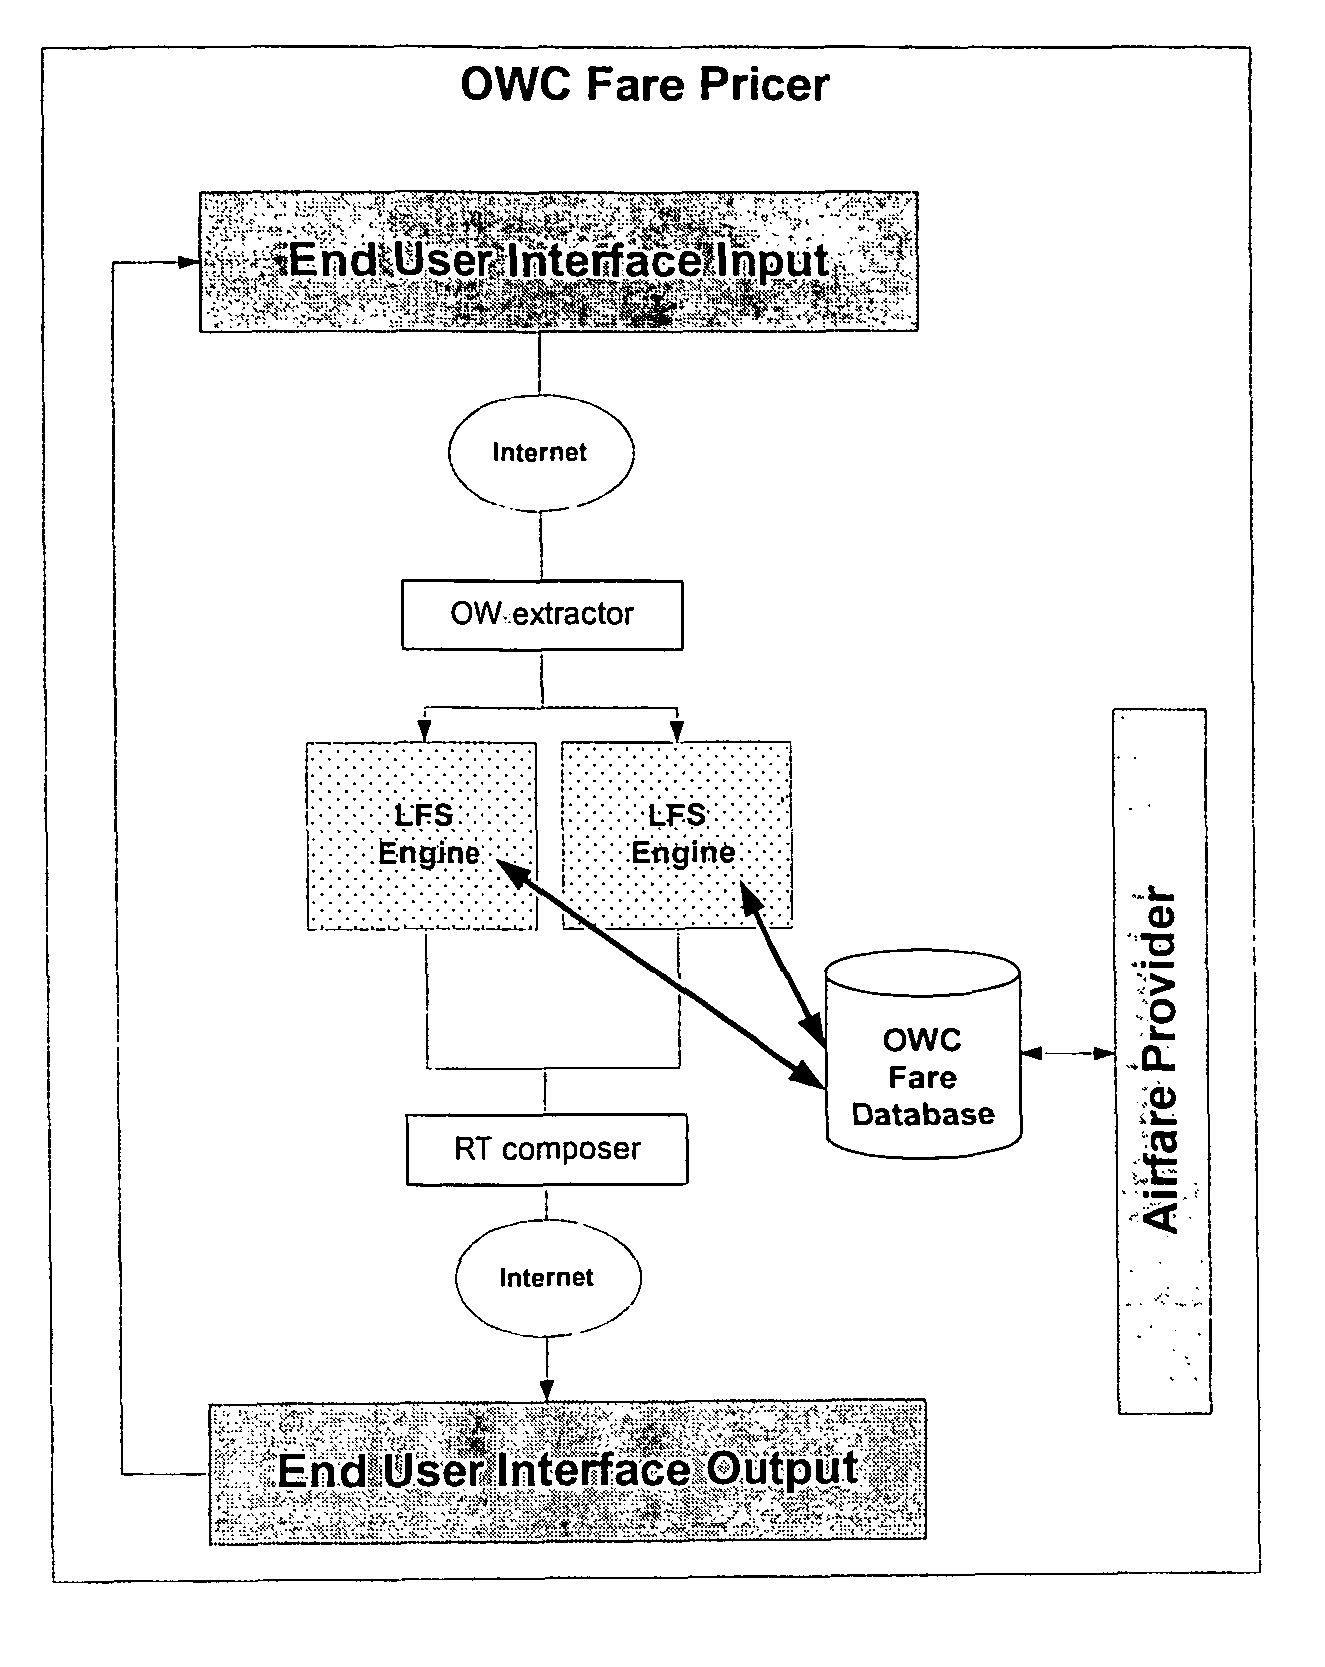 Air travel system and method for planning roundtrip flights using one way combinable fares